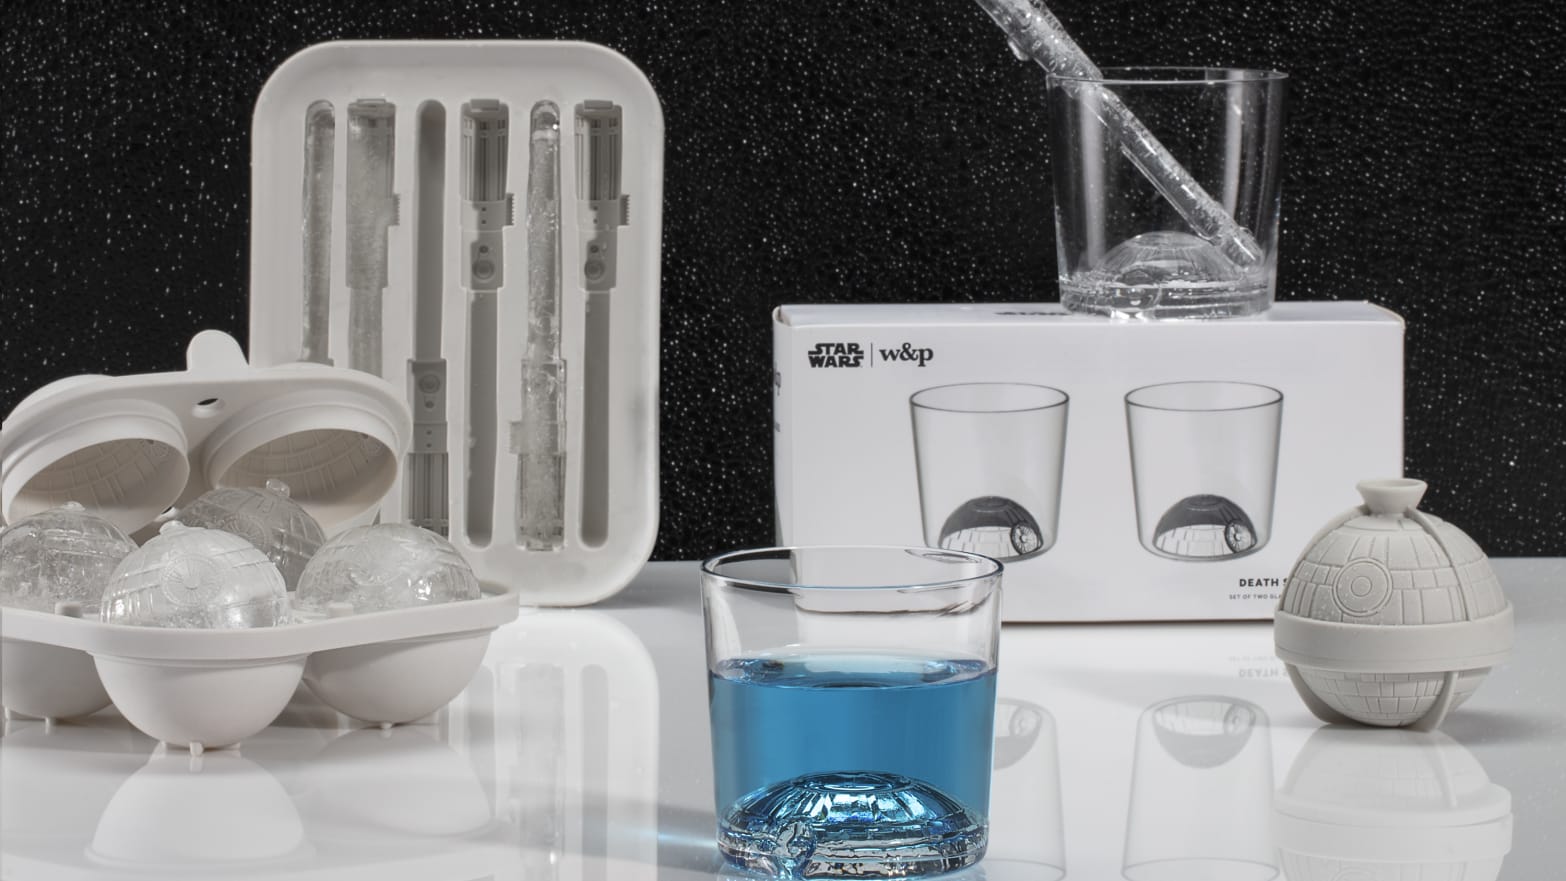 Shop Star Wars Ice Molds for May the Fourth